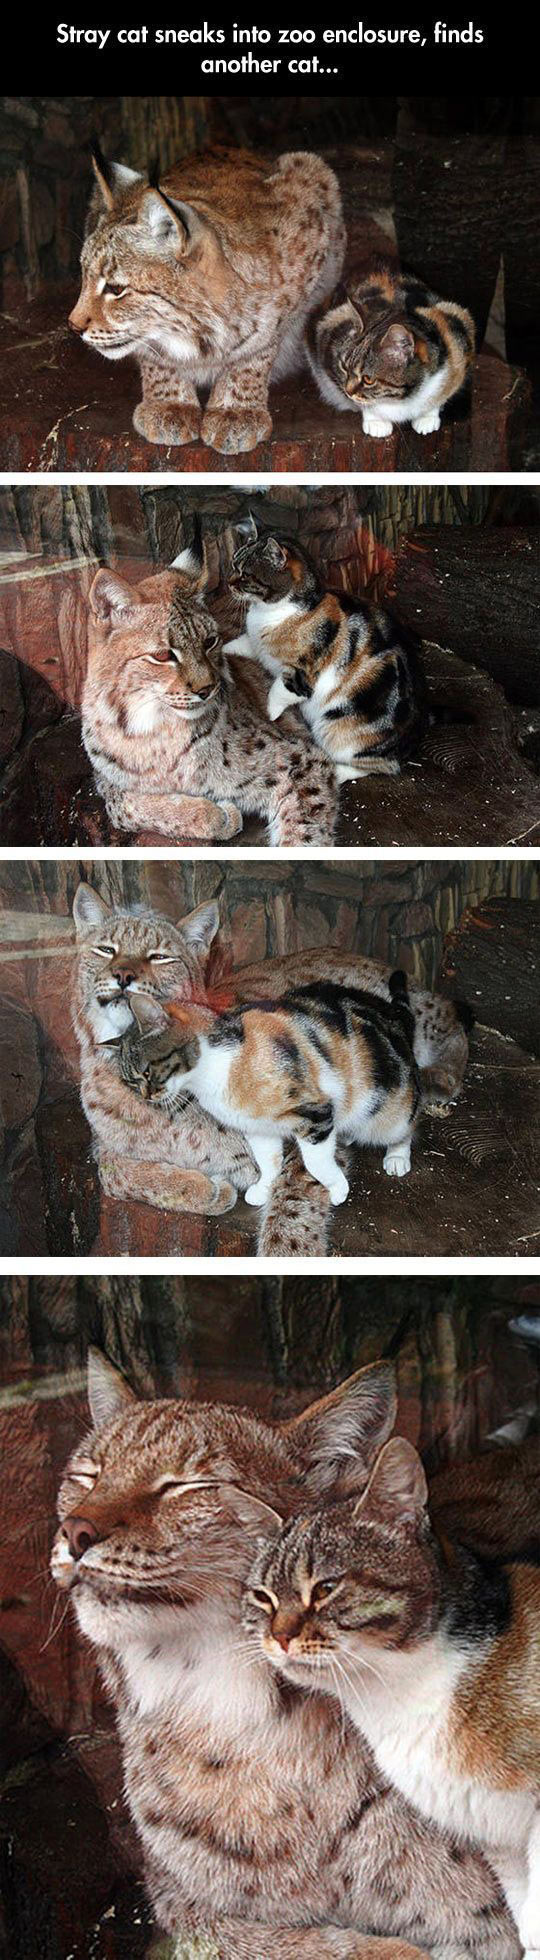 funny pics and randoms  - lynx cat - Stray cat sneaks into zoo enclosure, finds another cat...